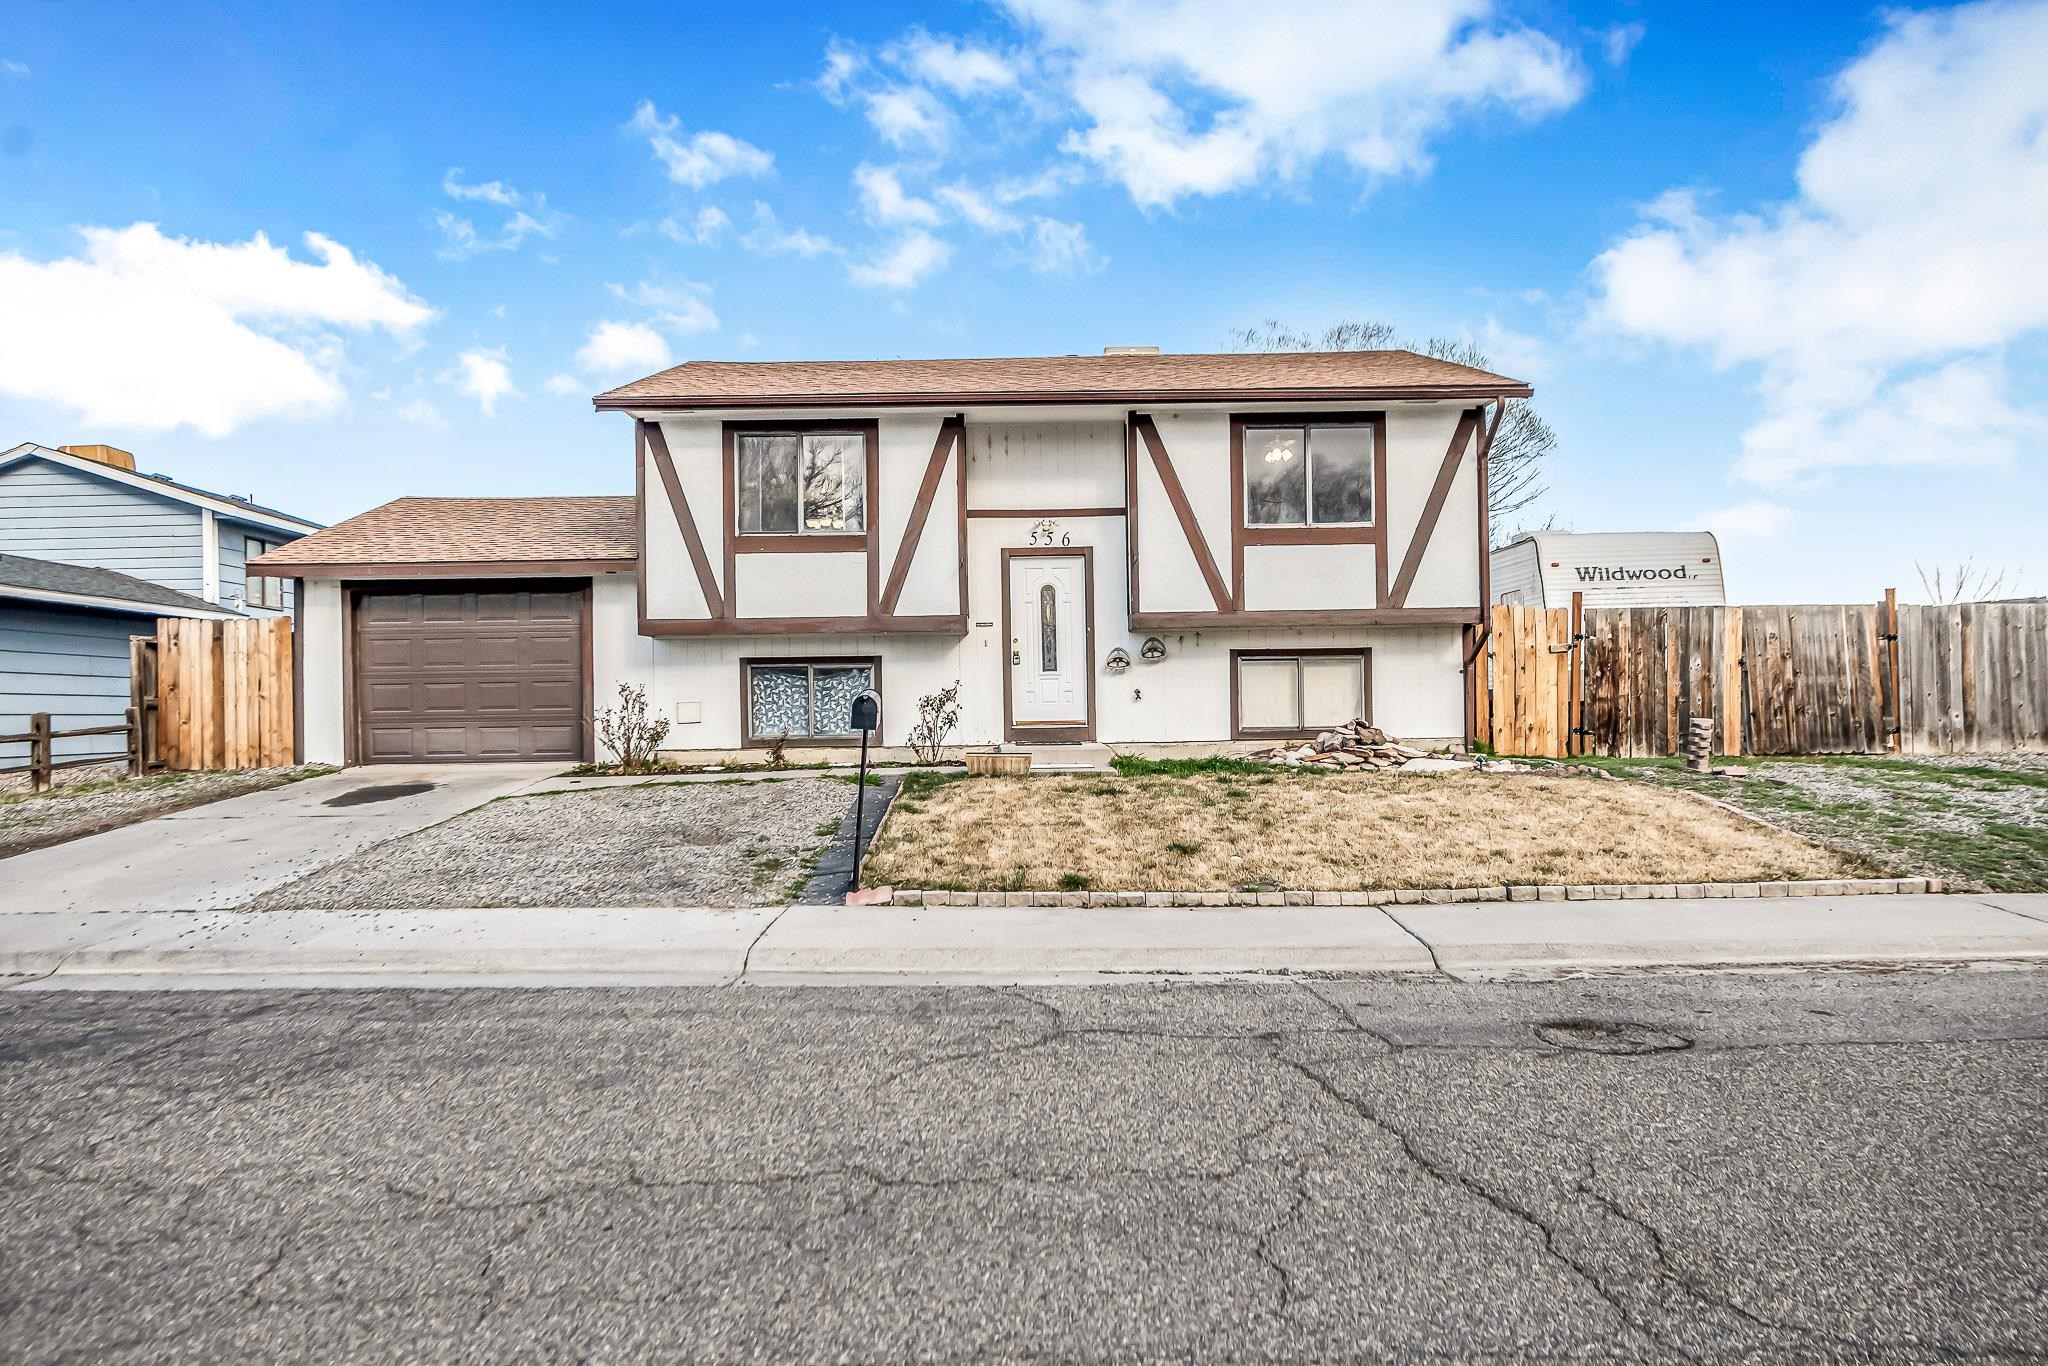 This bi-level home is situated on a large lot with great views and is conveniently located close to shopping, I-70, and hospitals. The home has multiple living areas, and plenty of room to spread out. Schedule your showing today!